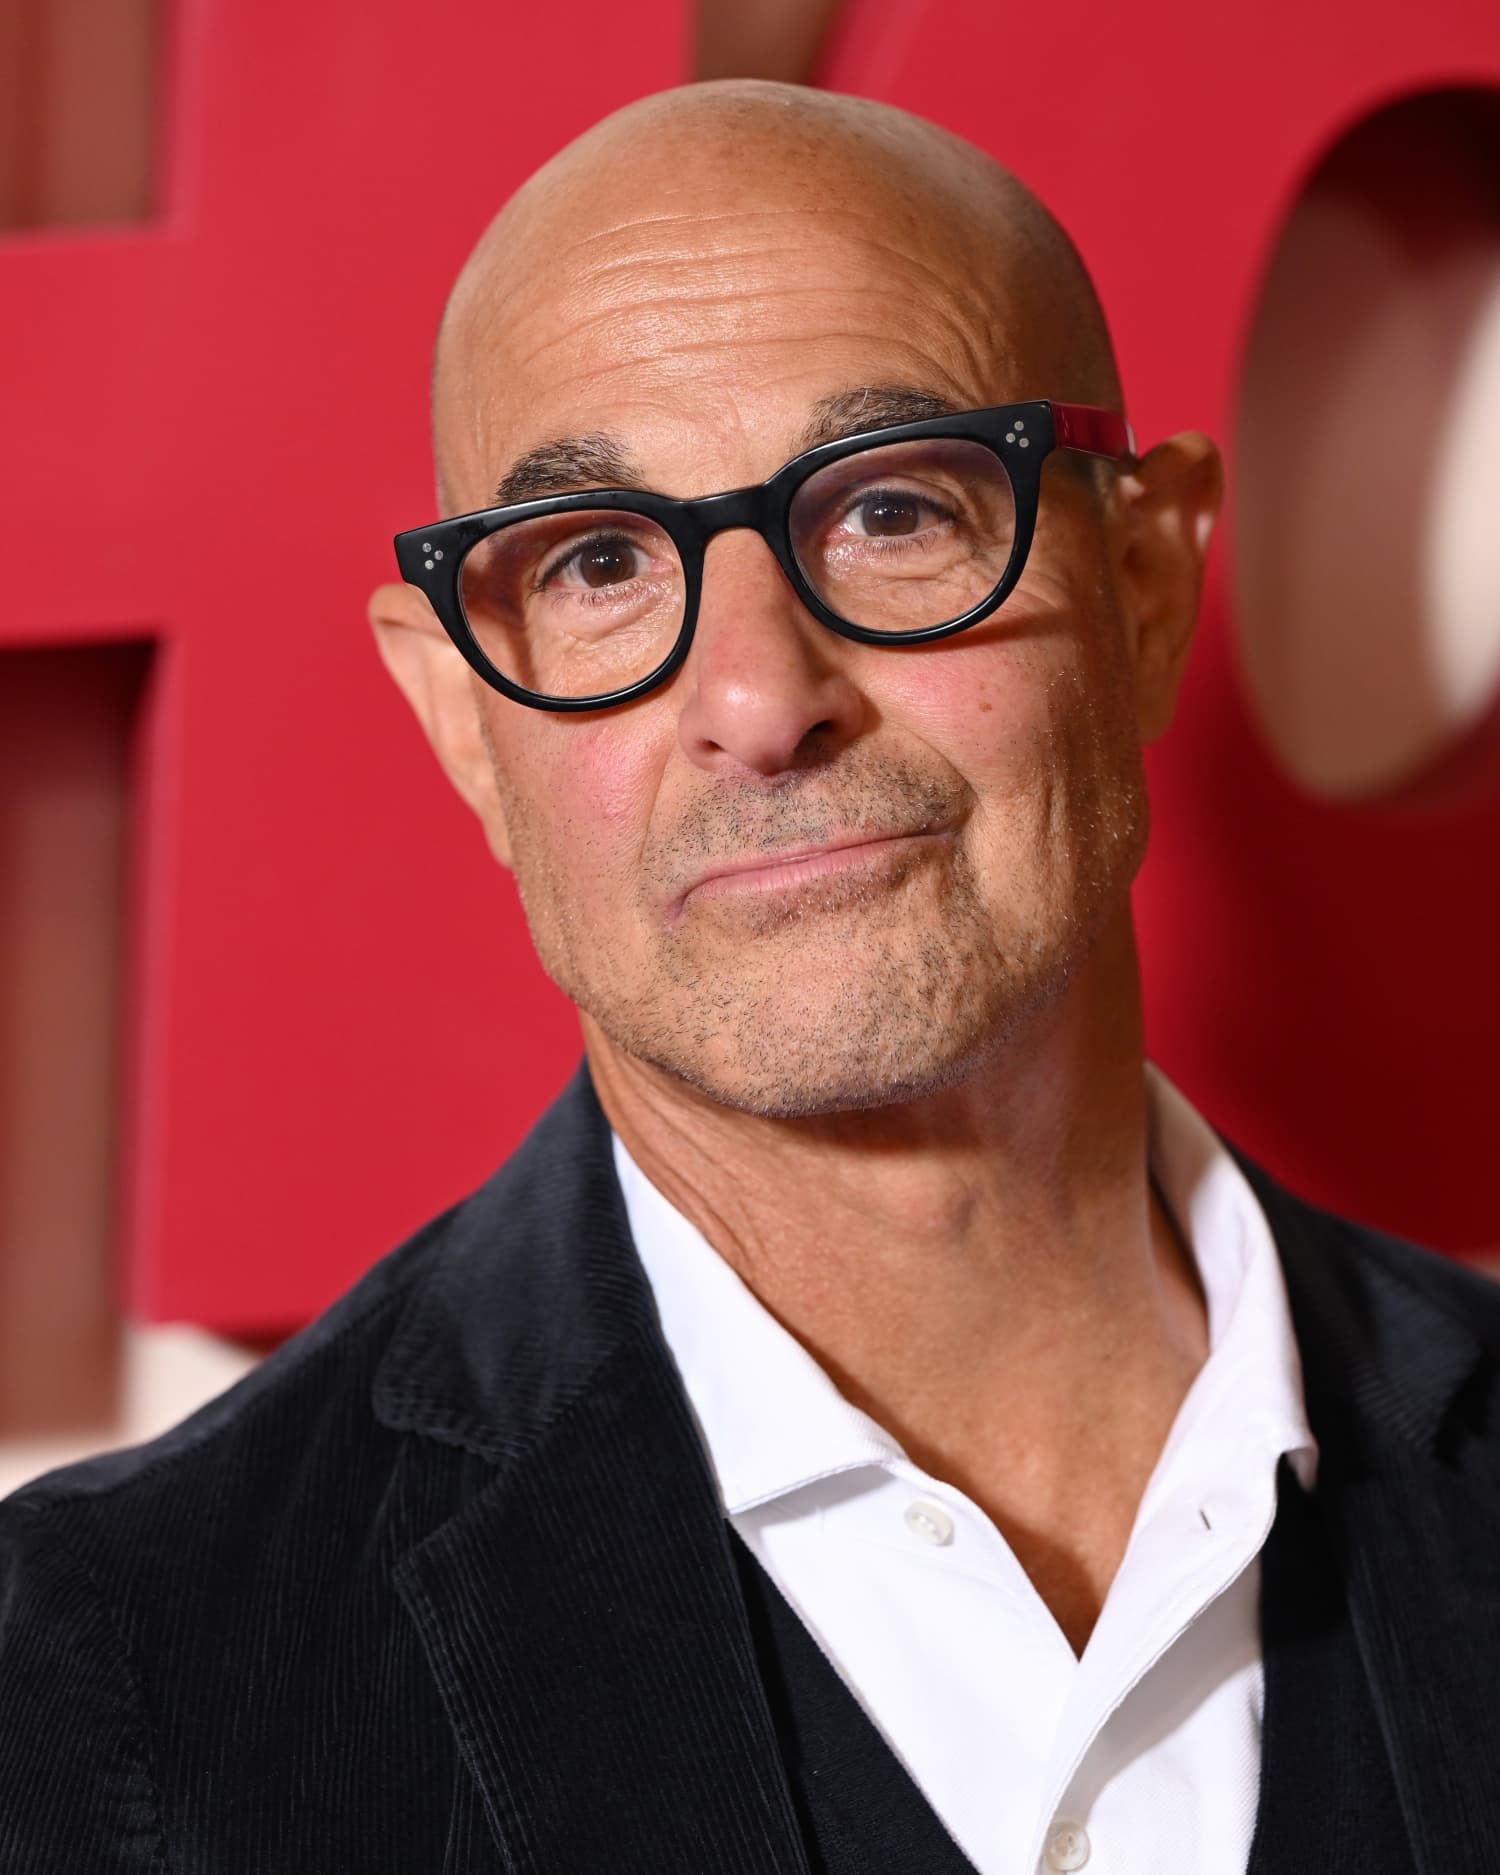 We Finally Have the Recipe for Stanley Tucci’s Favorite Sandwich, and You’re Going to Want to Try It ASAP